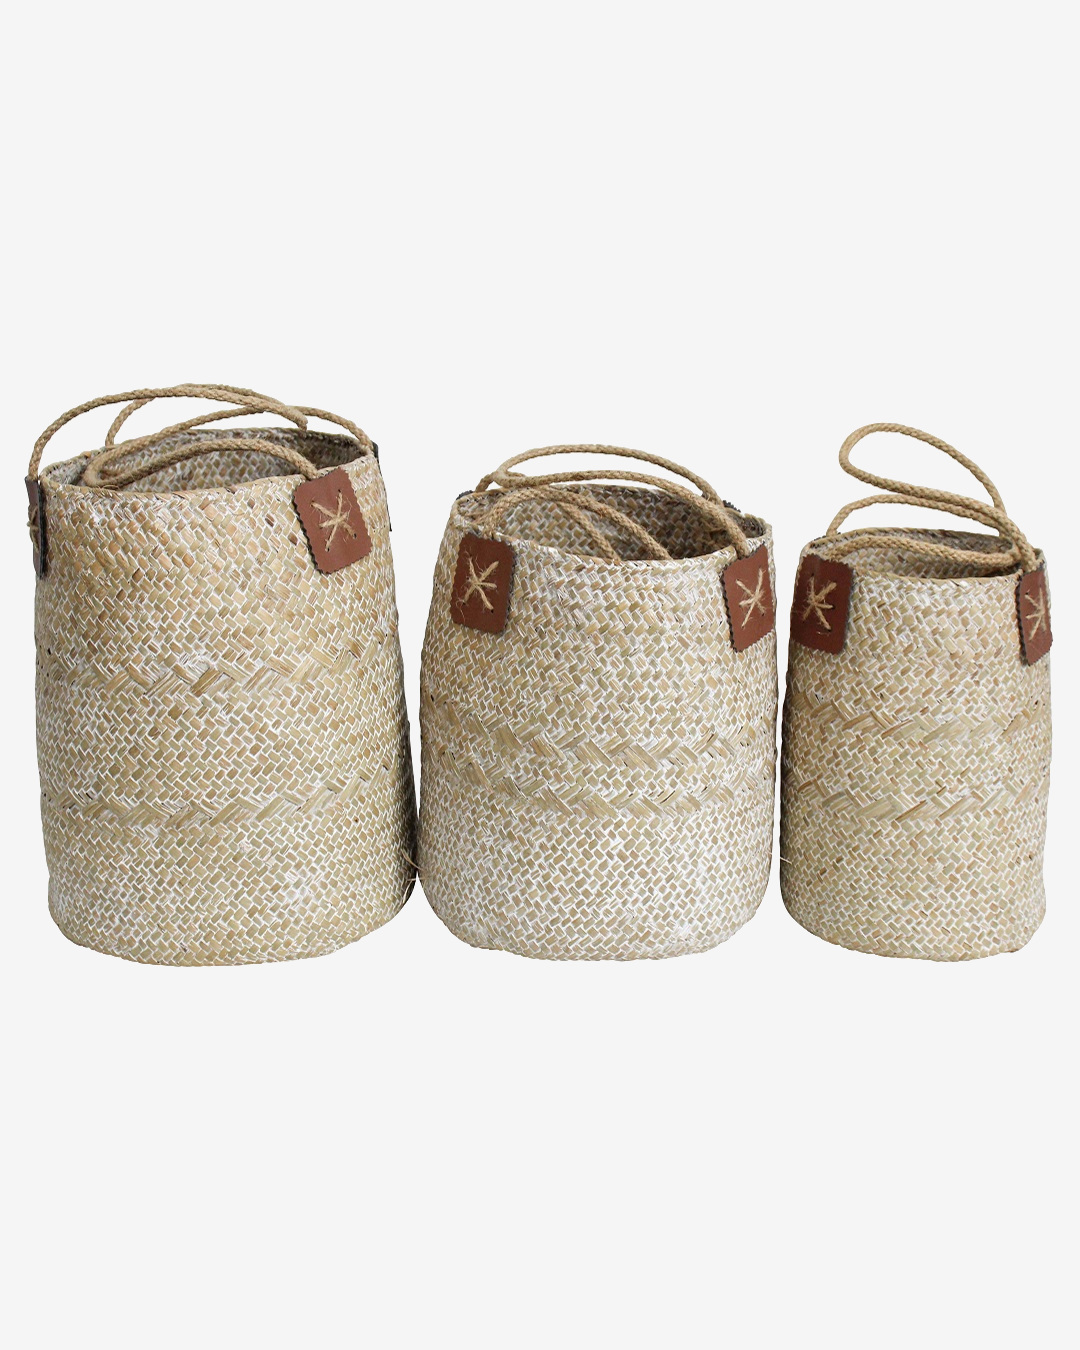 Woven rattan washing baskets in three sizes